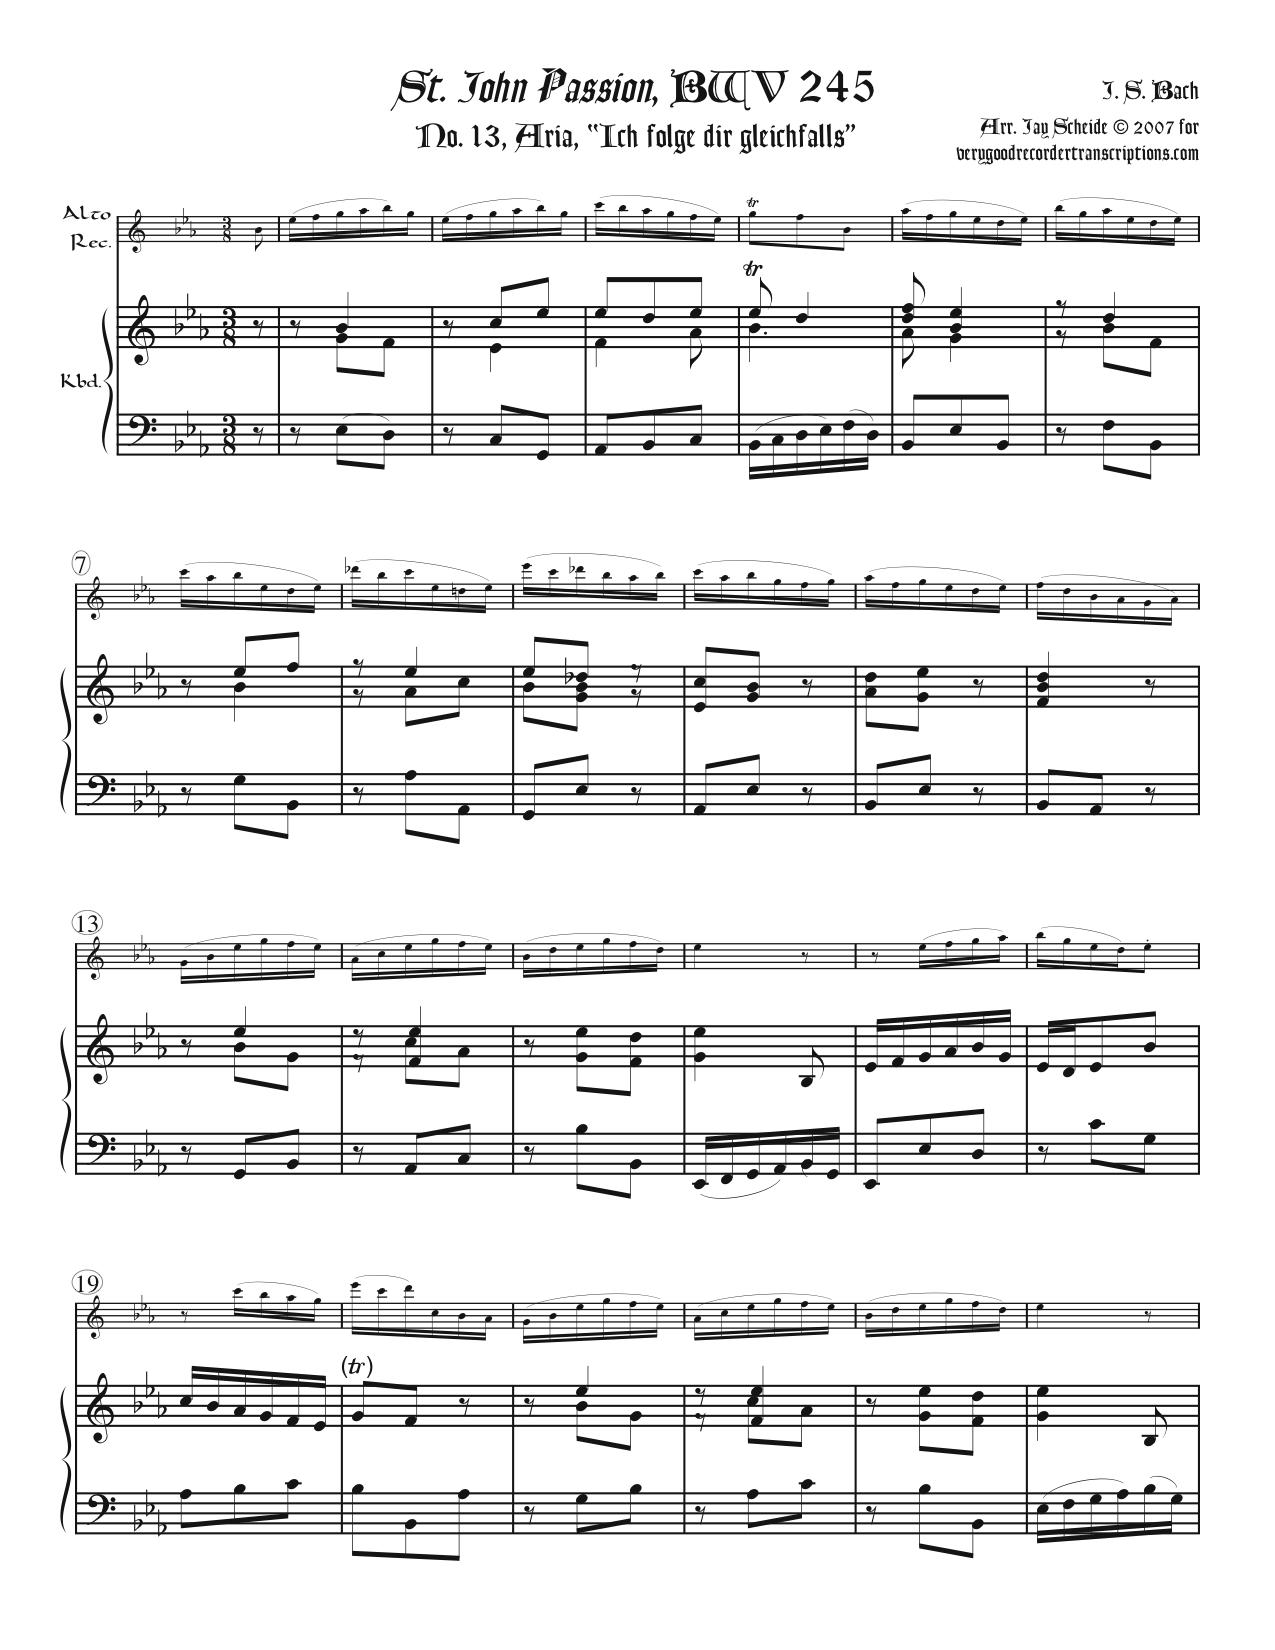 Aria, “Ich folge dir gleichfalls,” from the *St. John Passion*, BWV 245, in two different keys